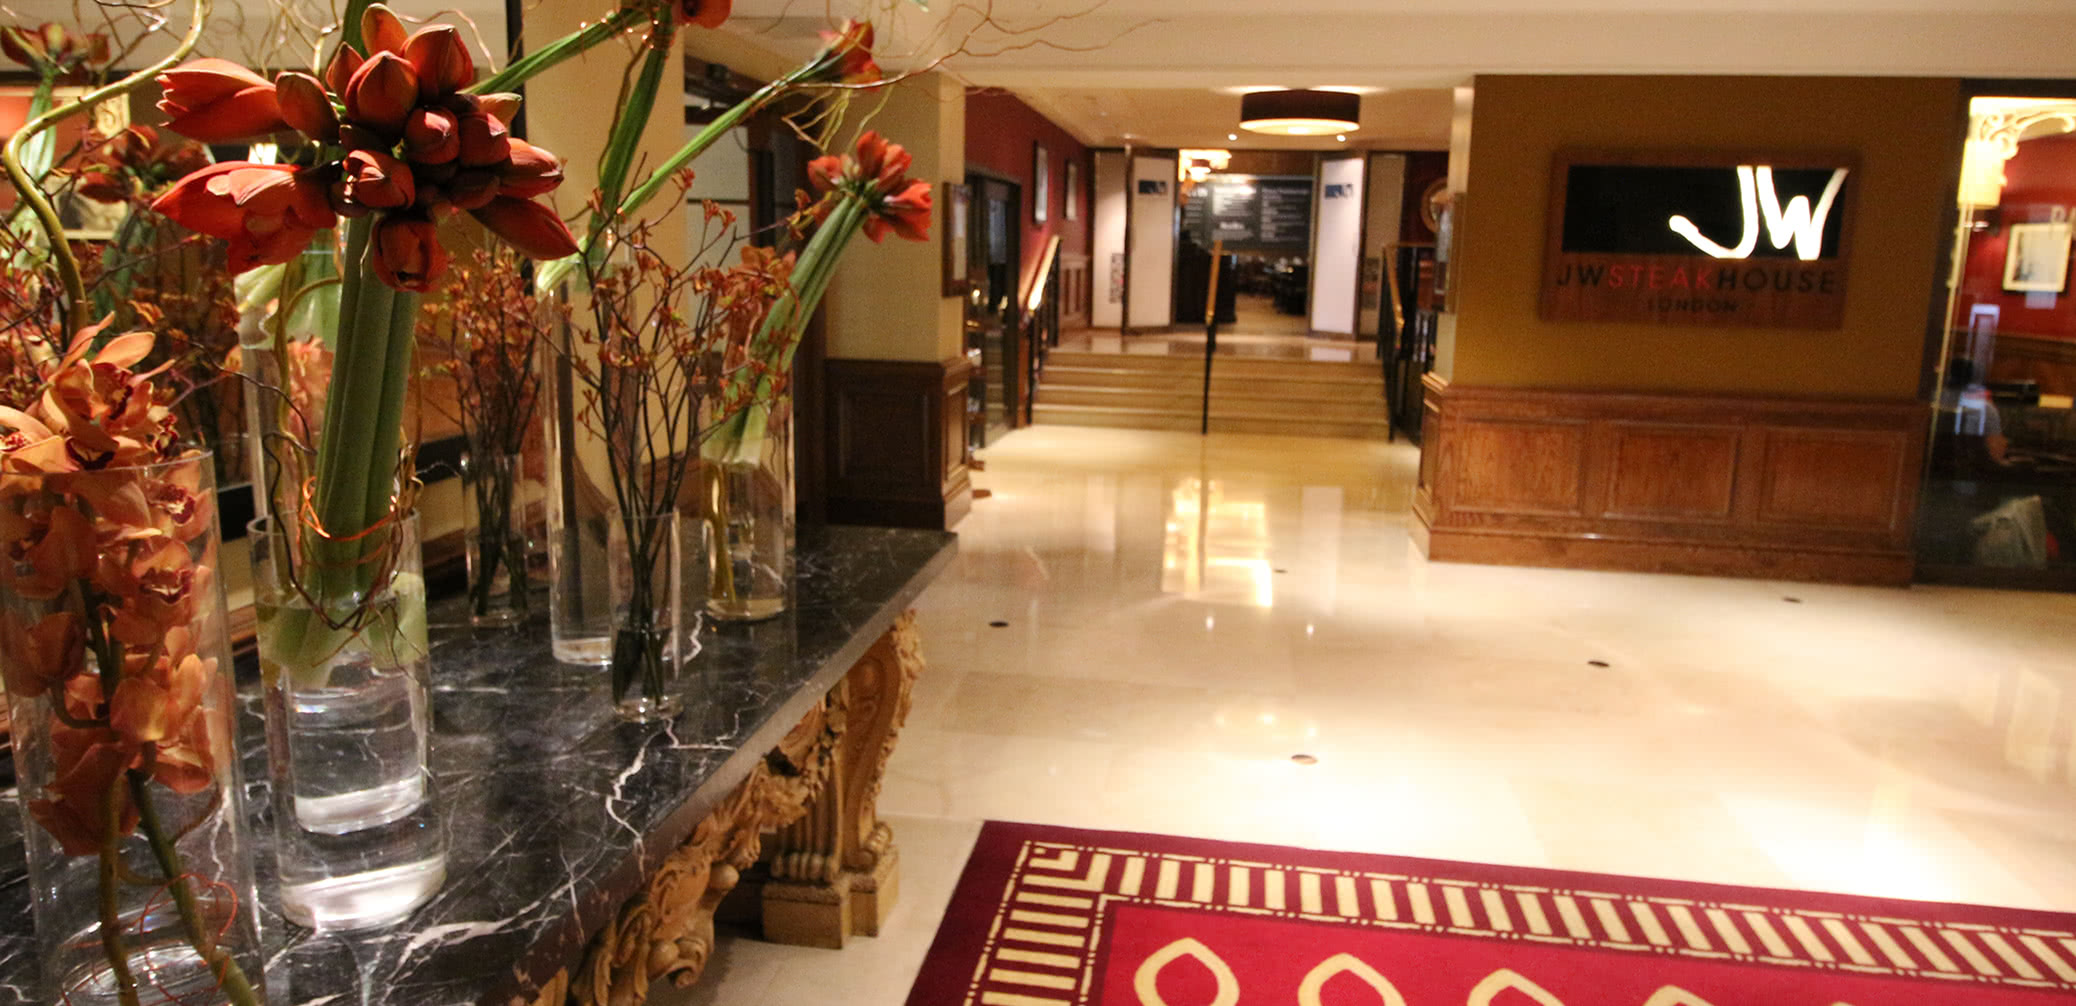 Best Hotels With Executive Club Lounges In Minsk, Belarus